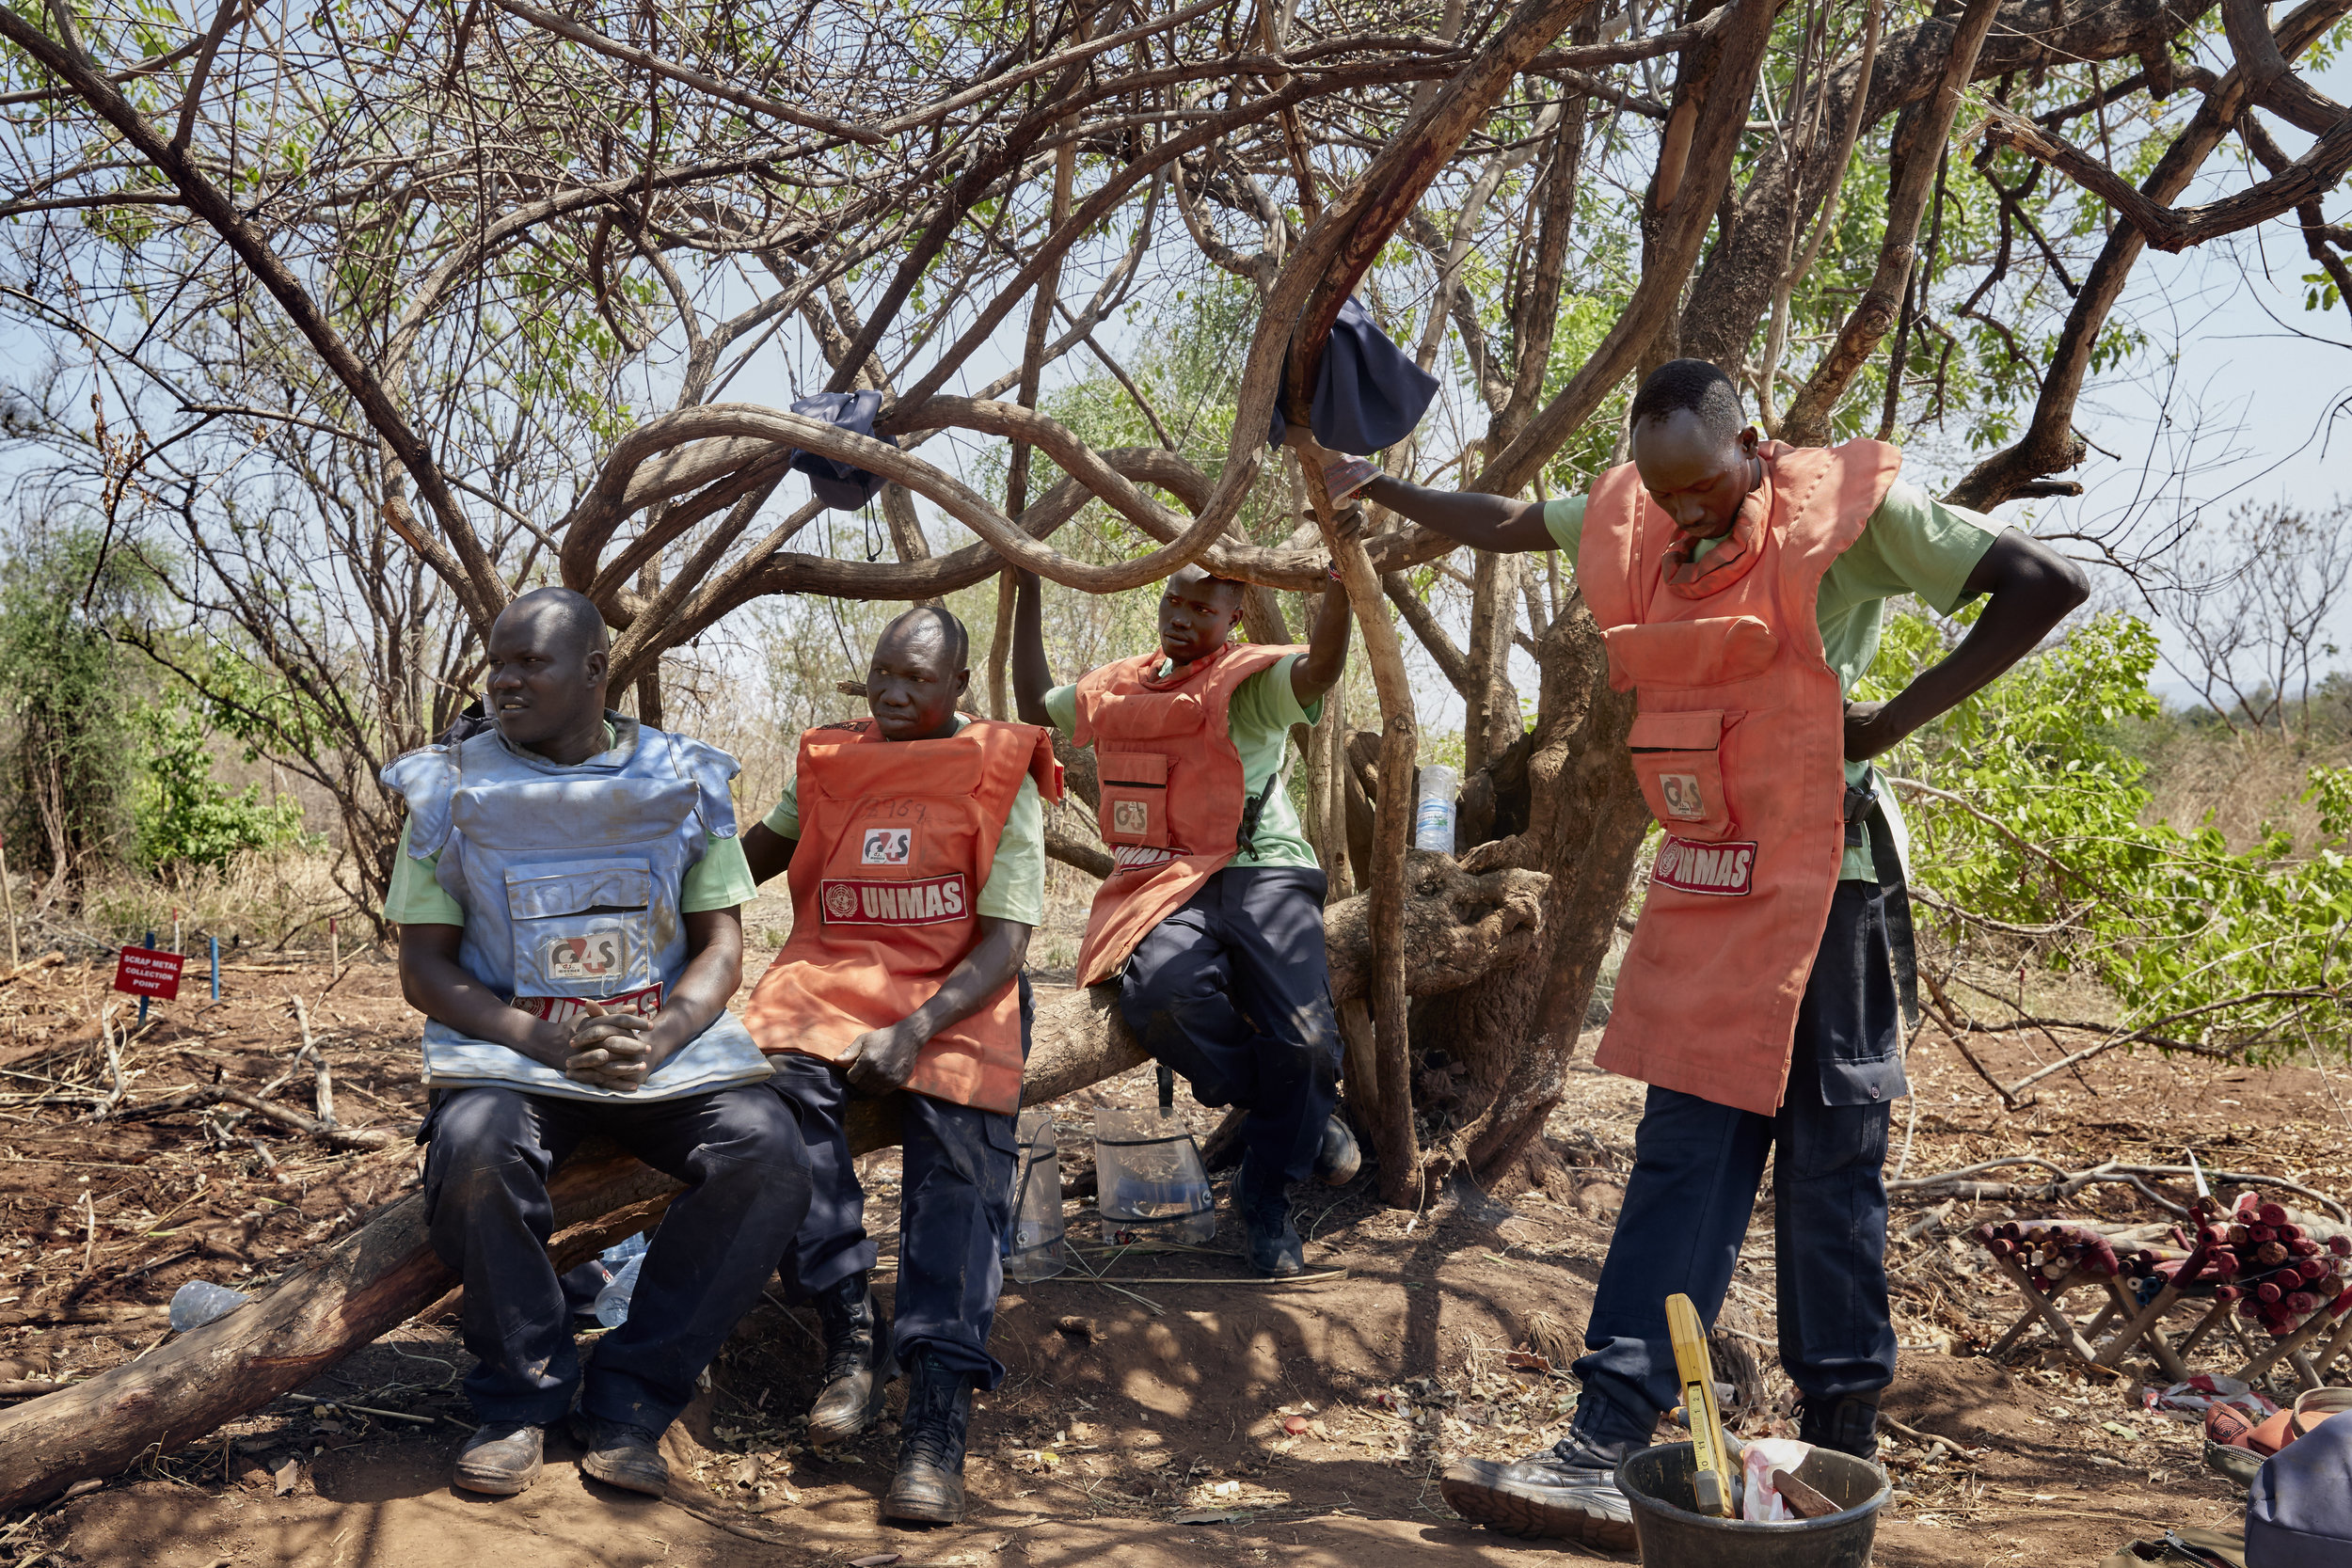 United Nations Mine Action Service workers take a break from searching for unexploded ordinance on the road between Nimule and Juba, South Sudan